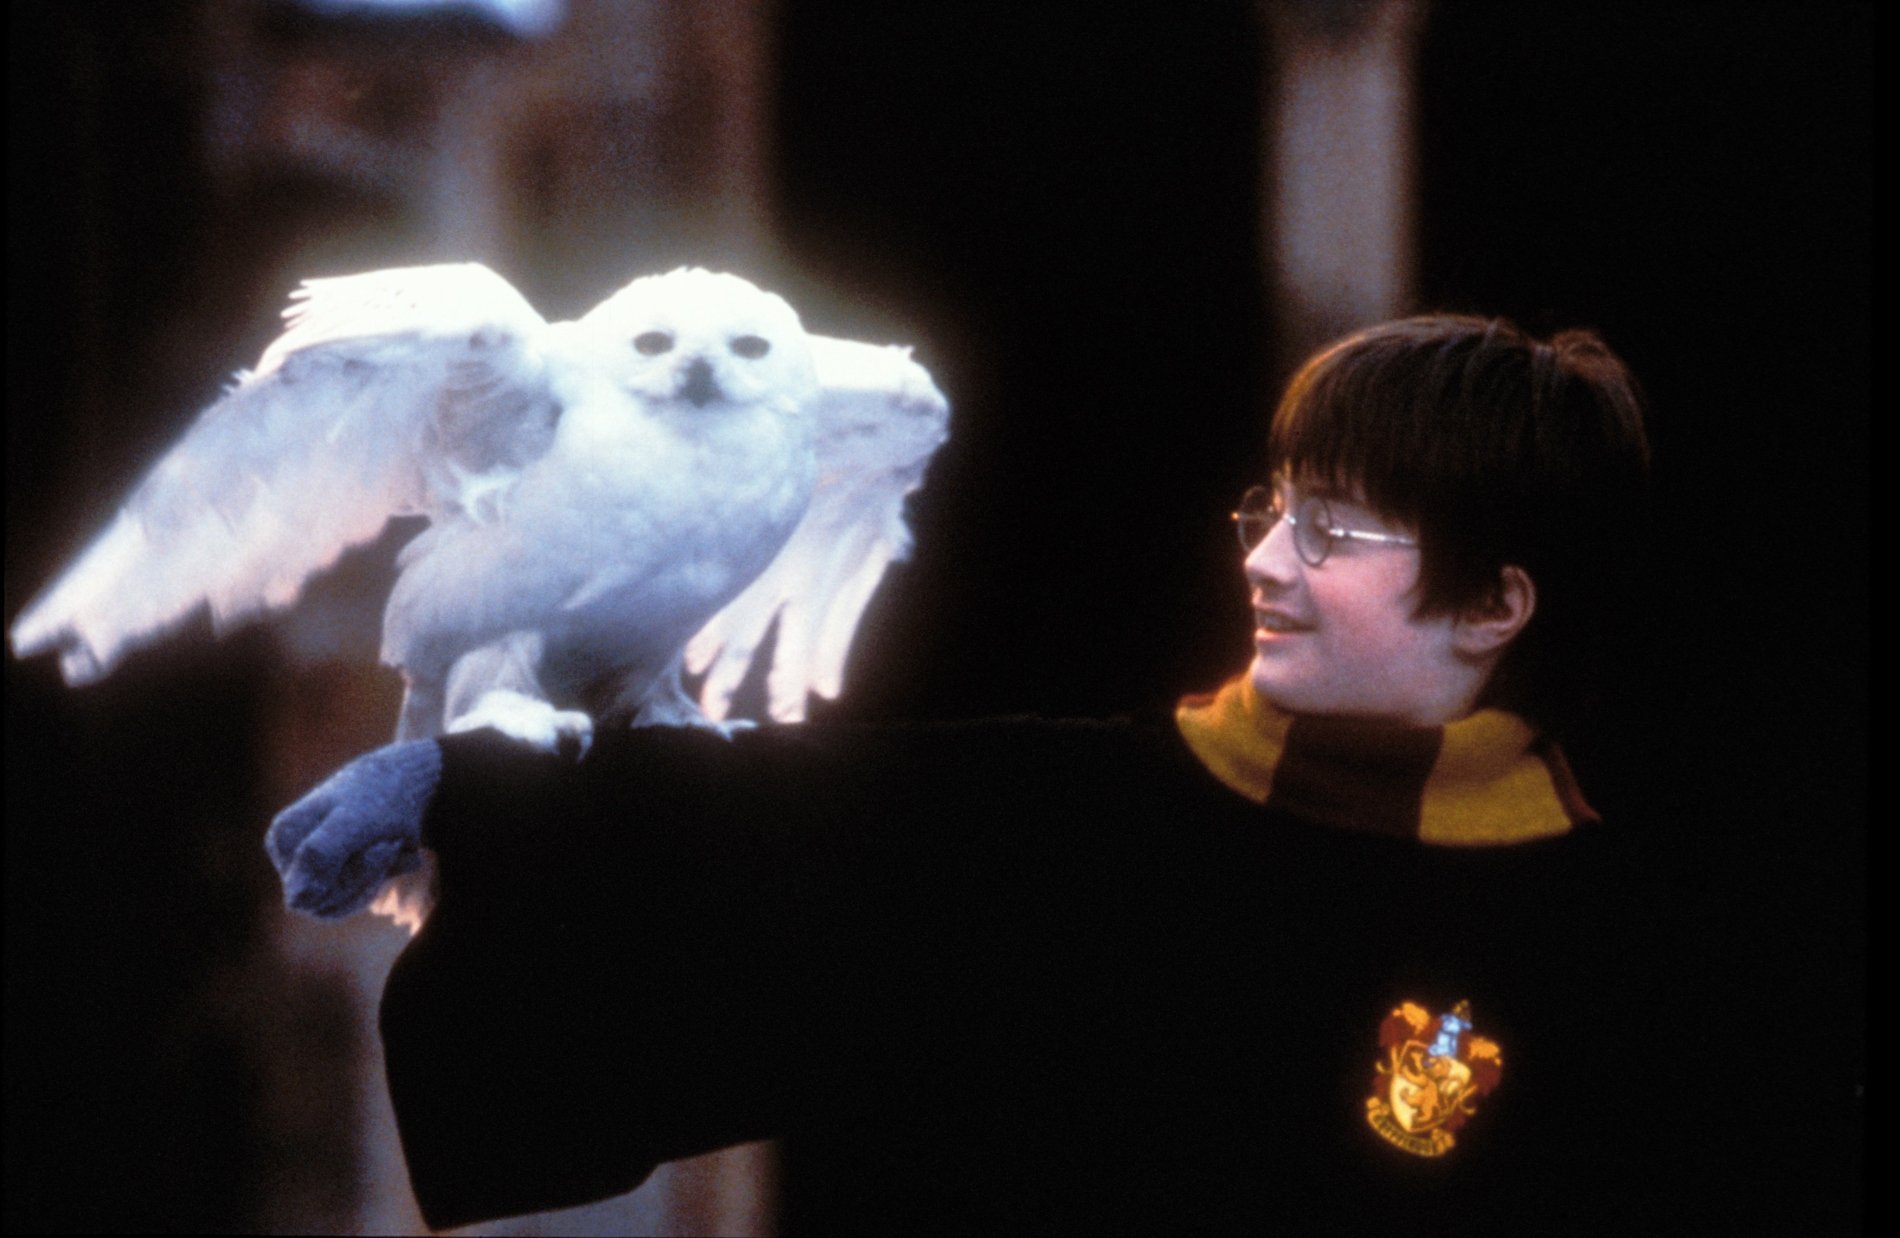 Harry Potter Fans Could See a 3-Hour Cut of ‘Sorcerer’s Stone’ With Poltergeist Peeve